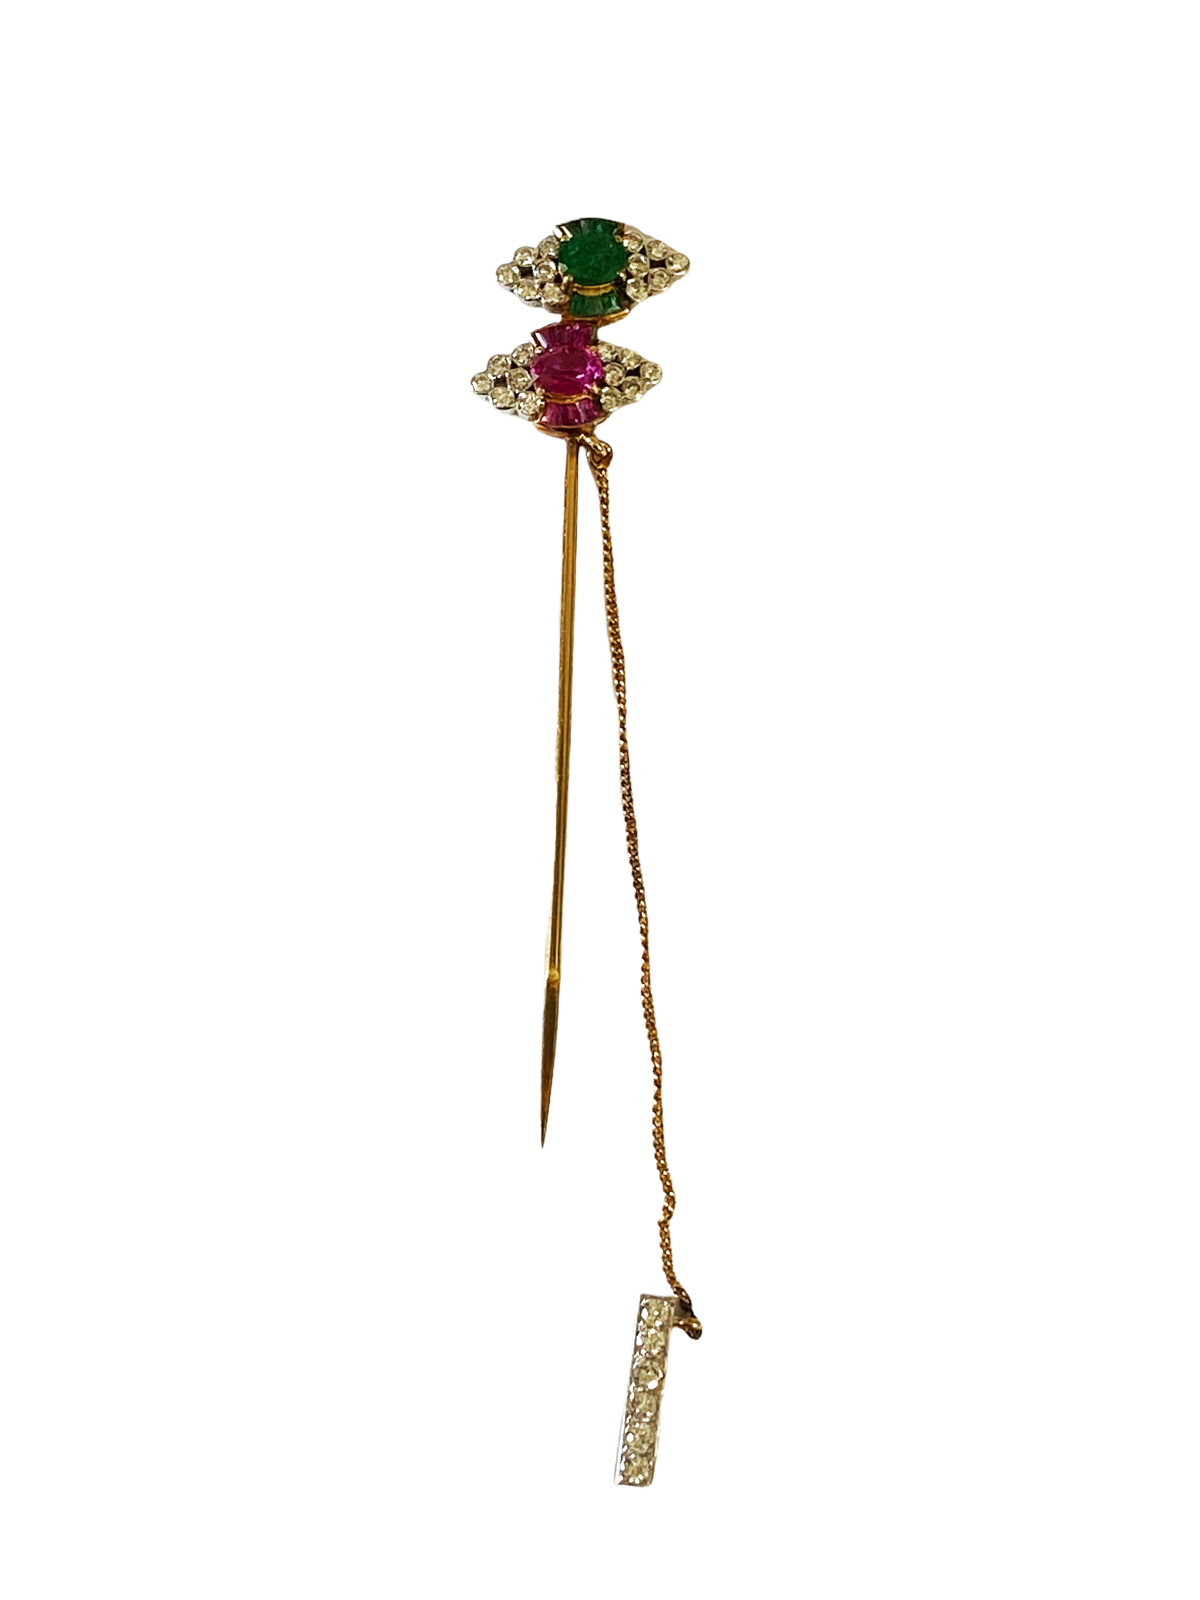 #4782 Antique European 18k Two Toned Gold Emerald and Ruby Stick Pin